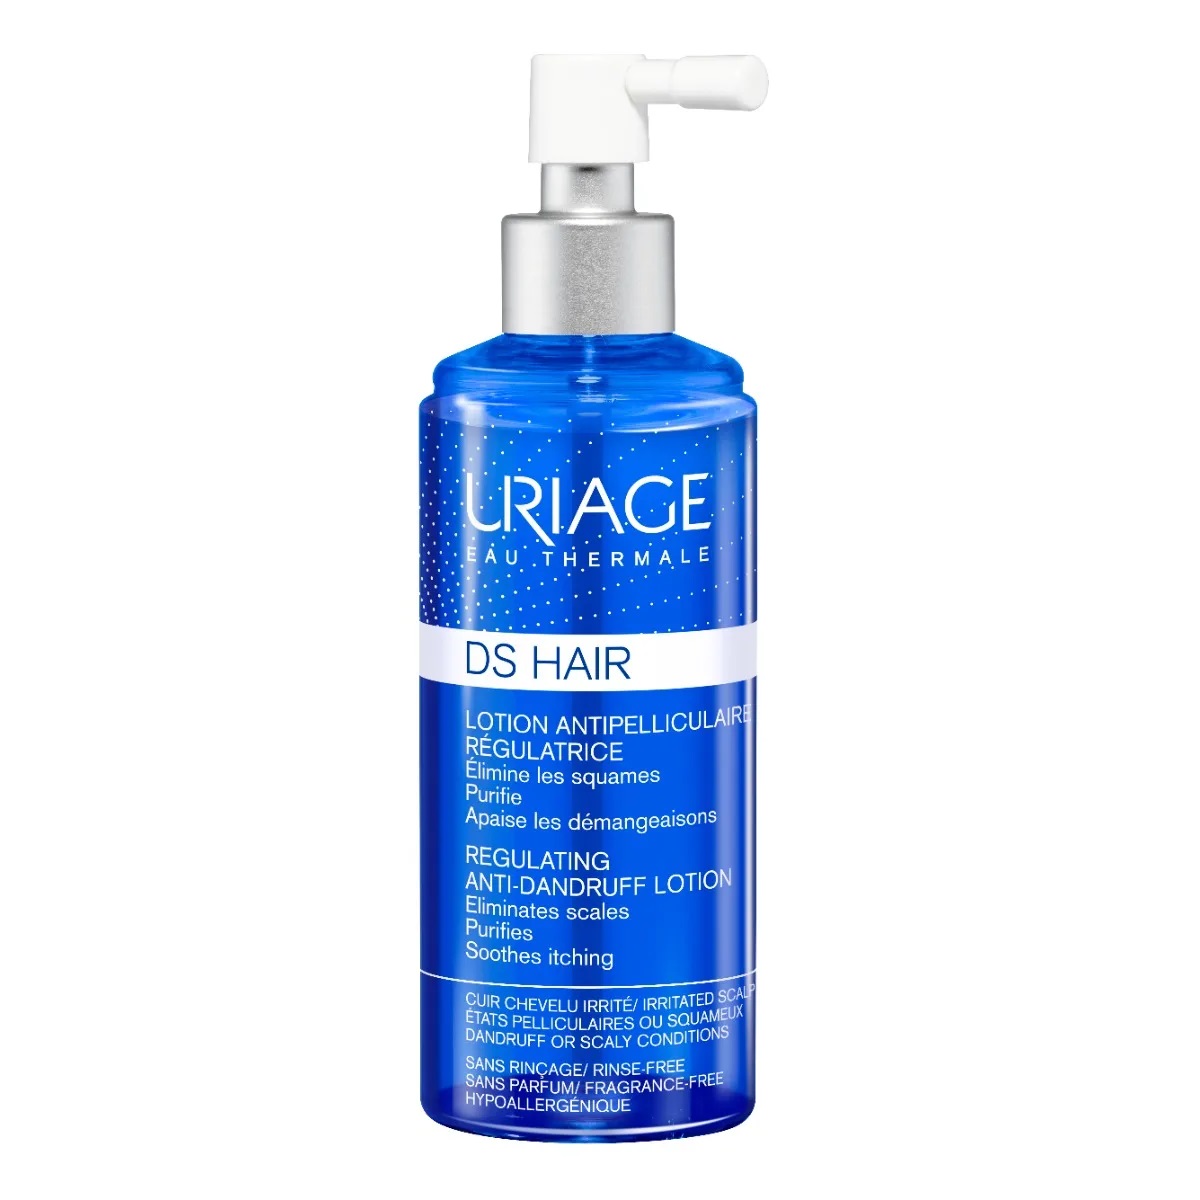 uriage-ds-hair-lotion-antipelliculaire-100ml-3661434002069